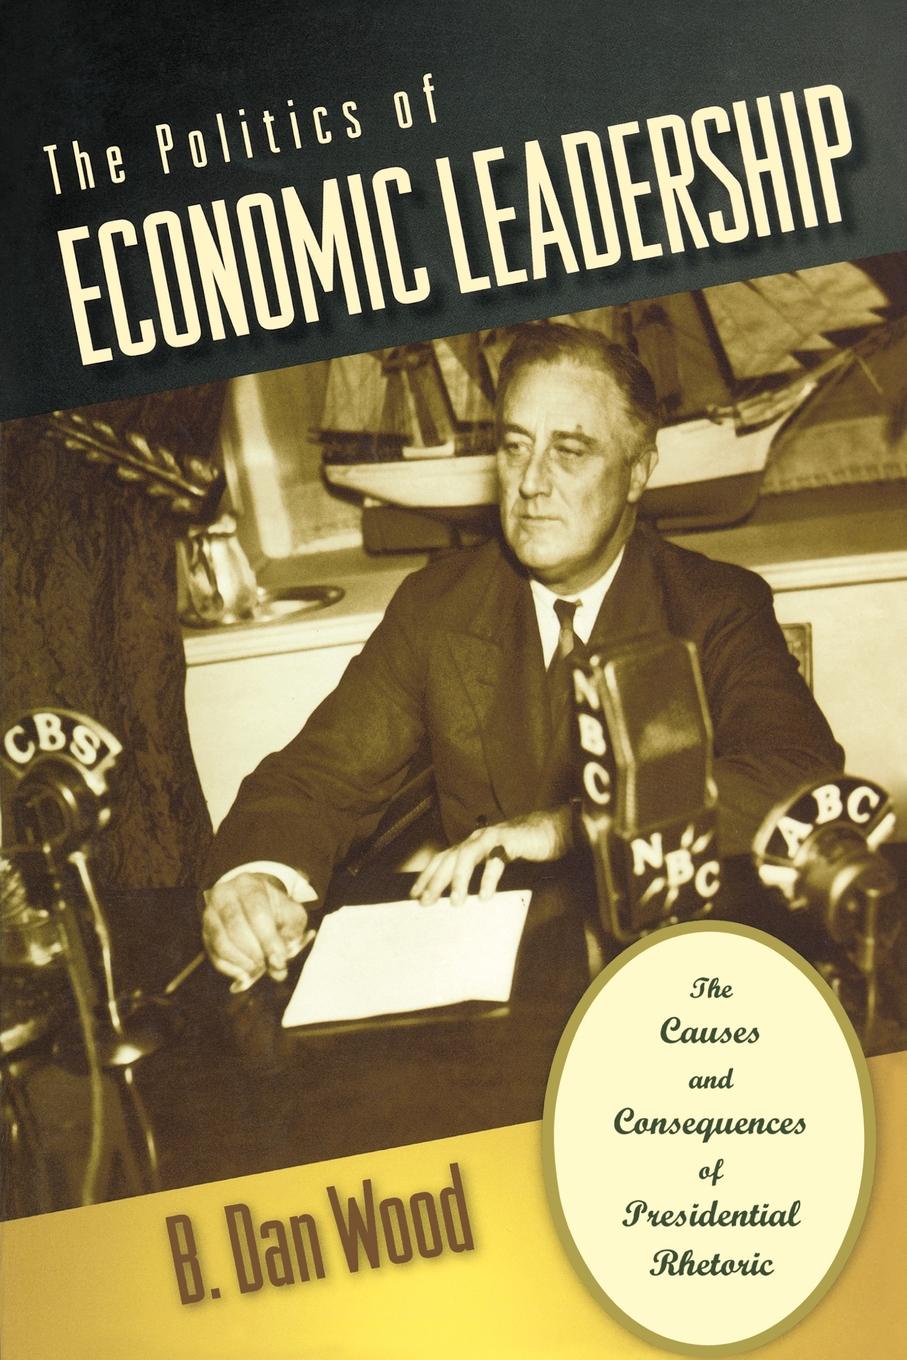 The Politics of Economic Leadership. The Causes and Consequences of Presidential Rhetoric